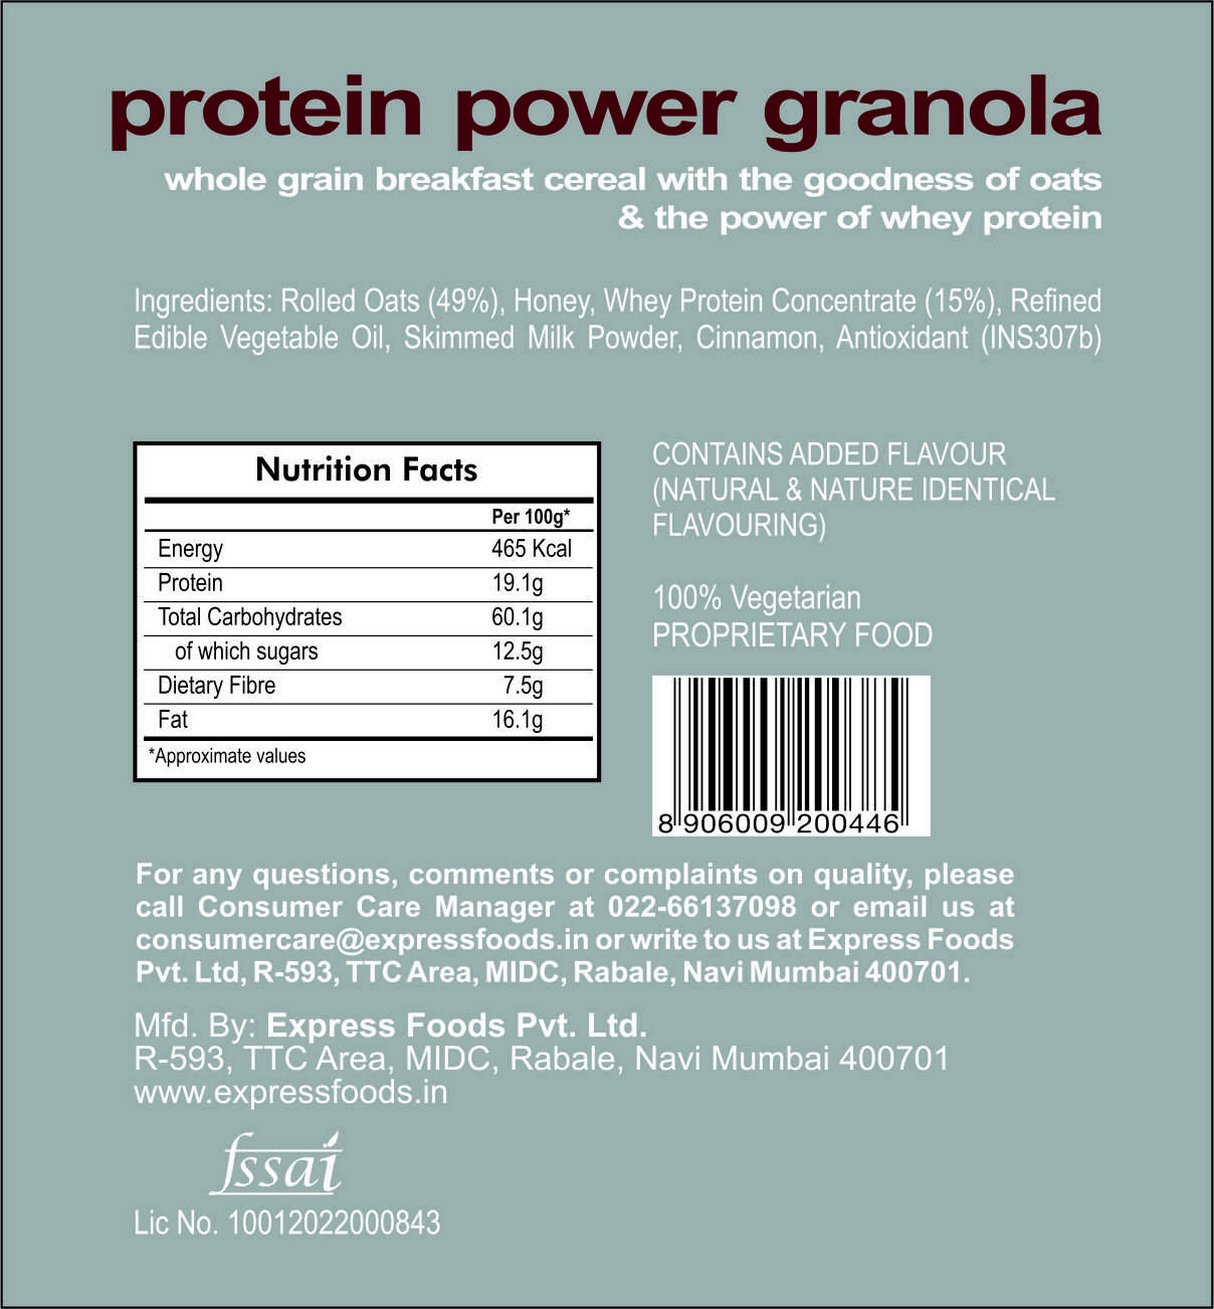 Express Foods Protein Power Granola Image